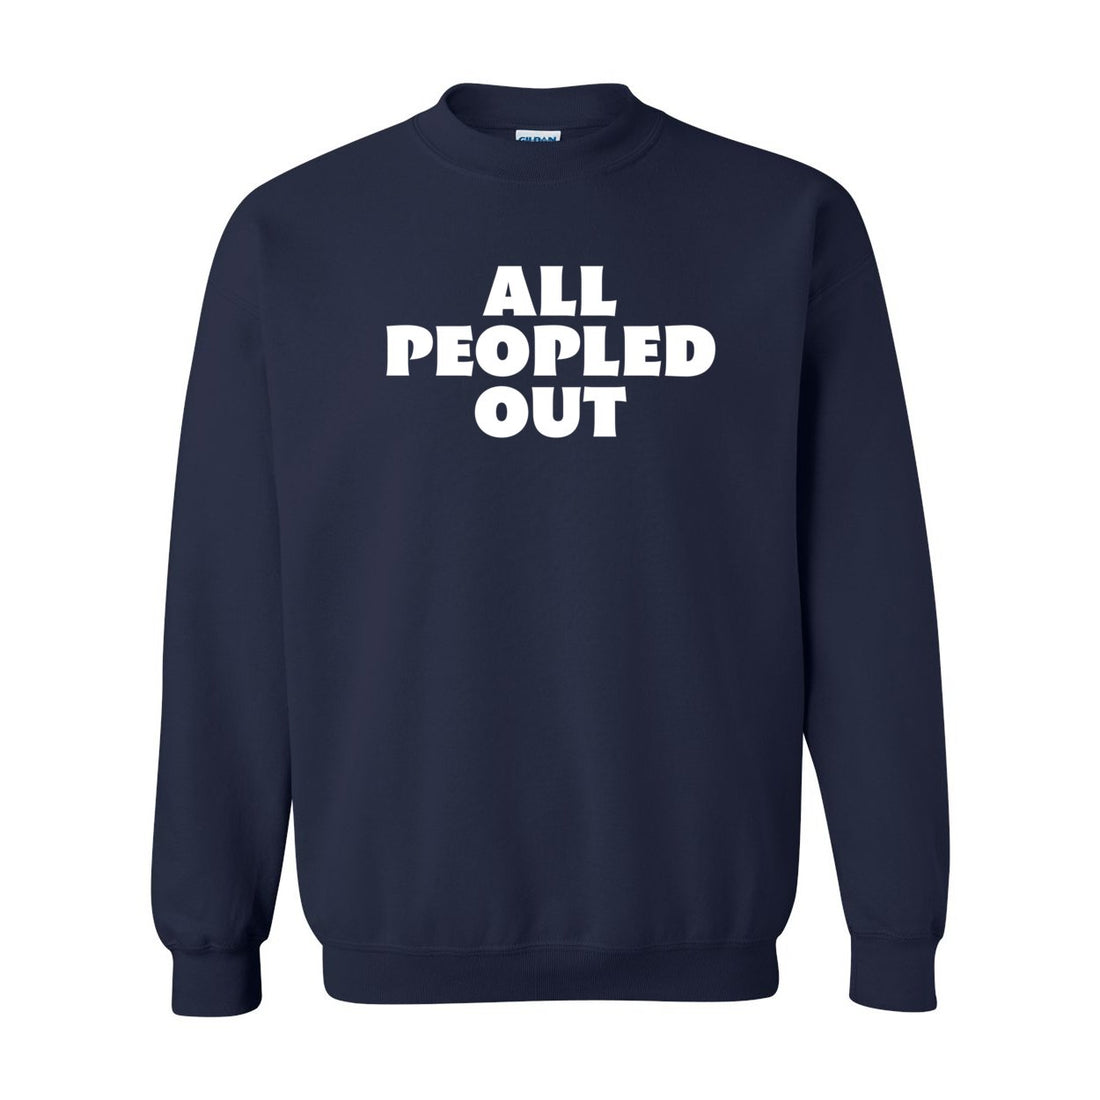 All Peopled Out Crewneck Sweatshirt - Sweaters/Hoodies - Positively Sassy - All Peopled Out Crewneck Sweatshirt